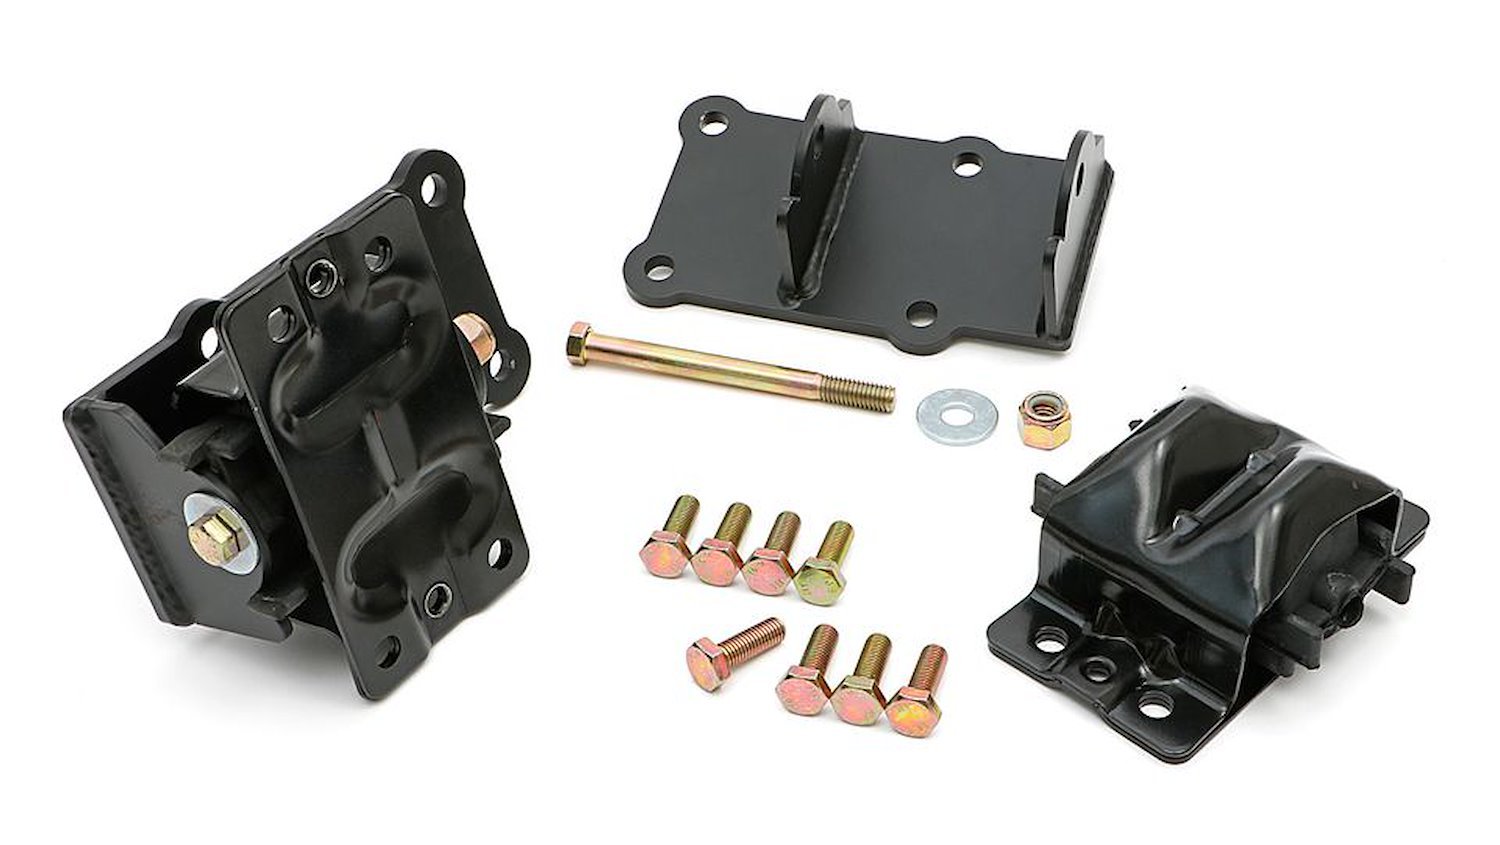 Engine Swap Motor Mount Kit for GM LS into 1982-1988 GM G-Body Cars and 1978-1981 GM A-Body